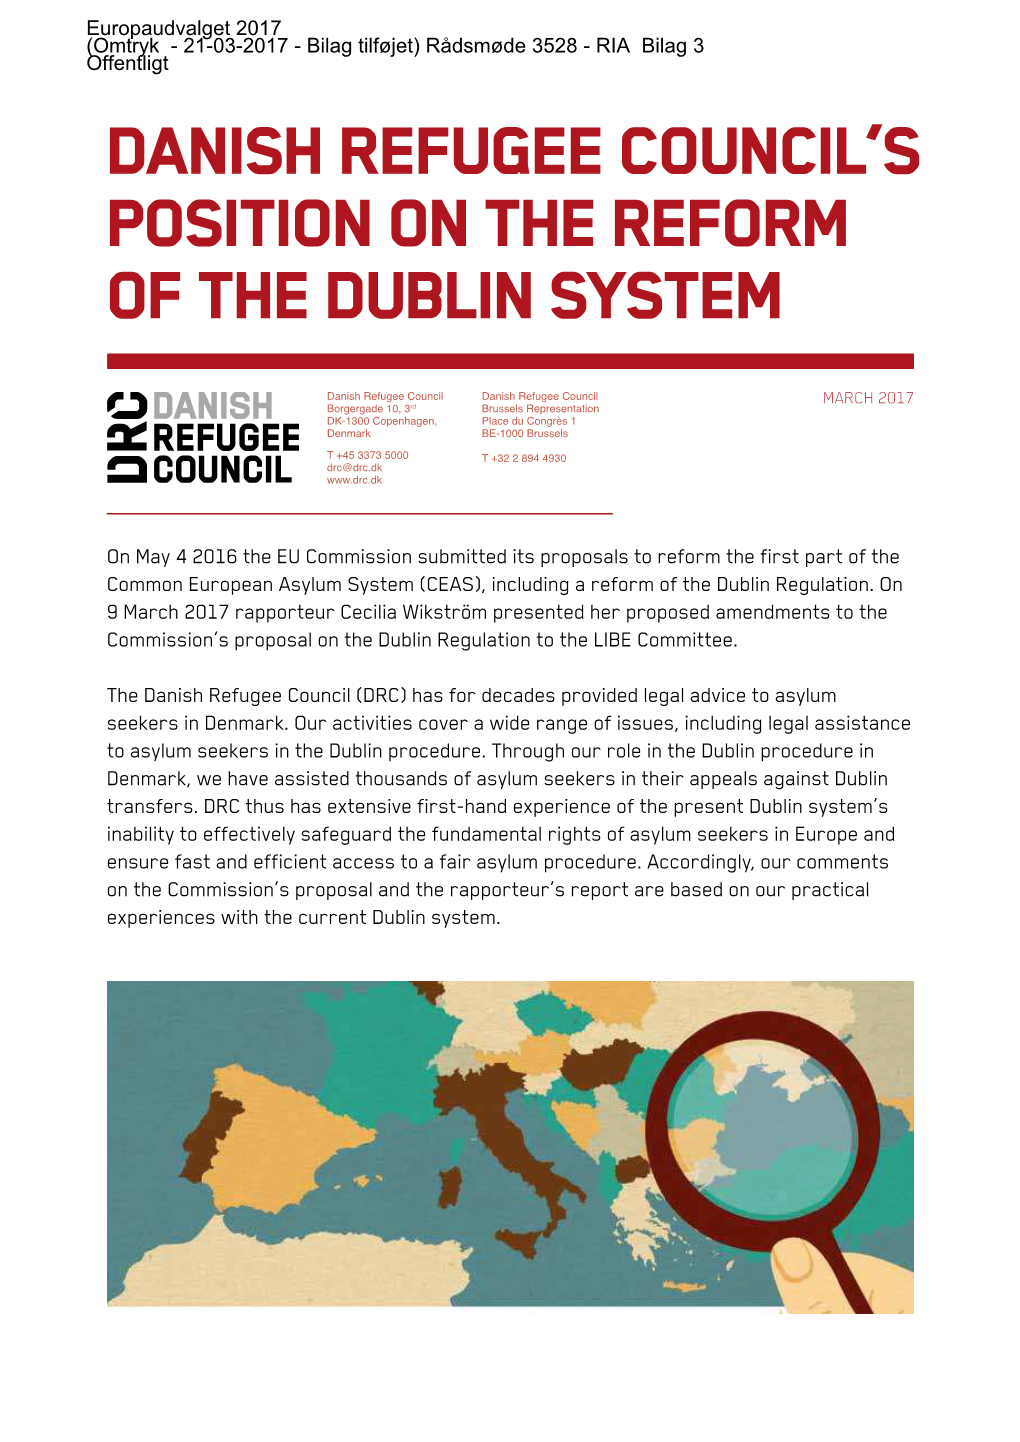 Danish Refugee Council's Position on the Reform of the Dublin System